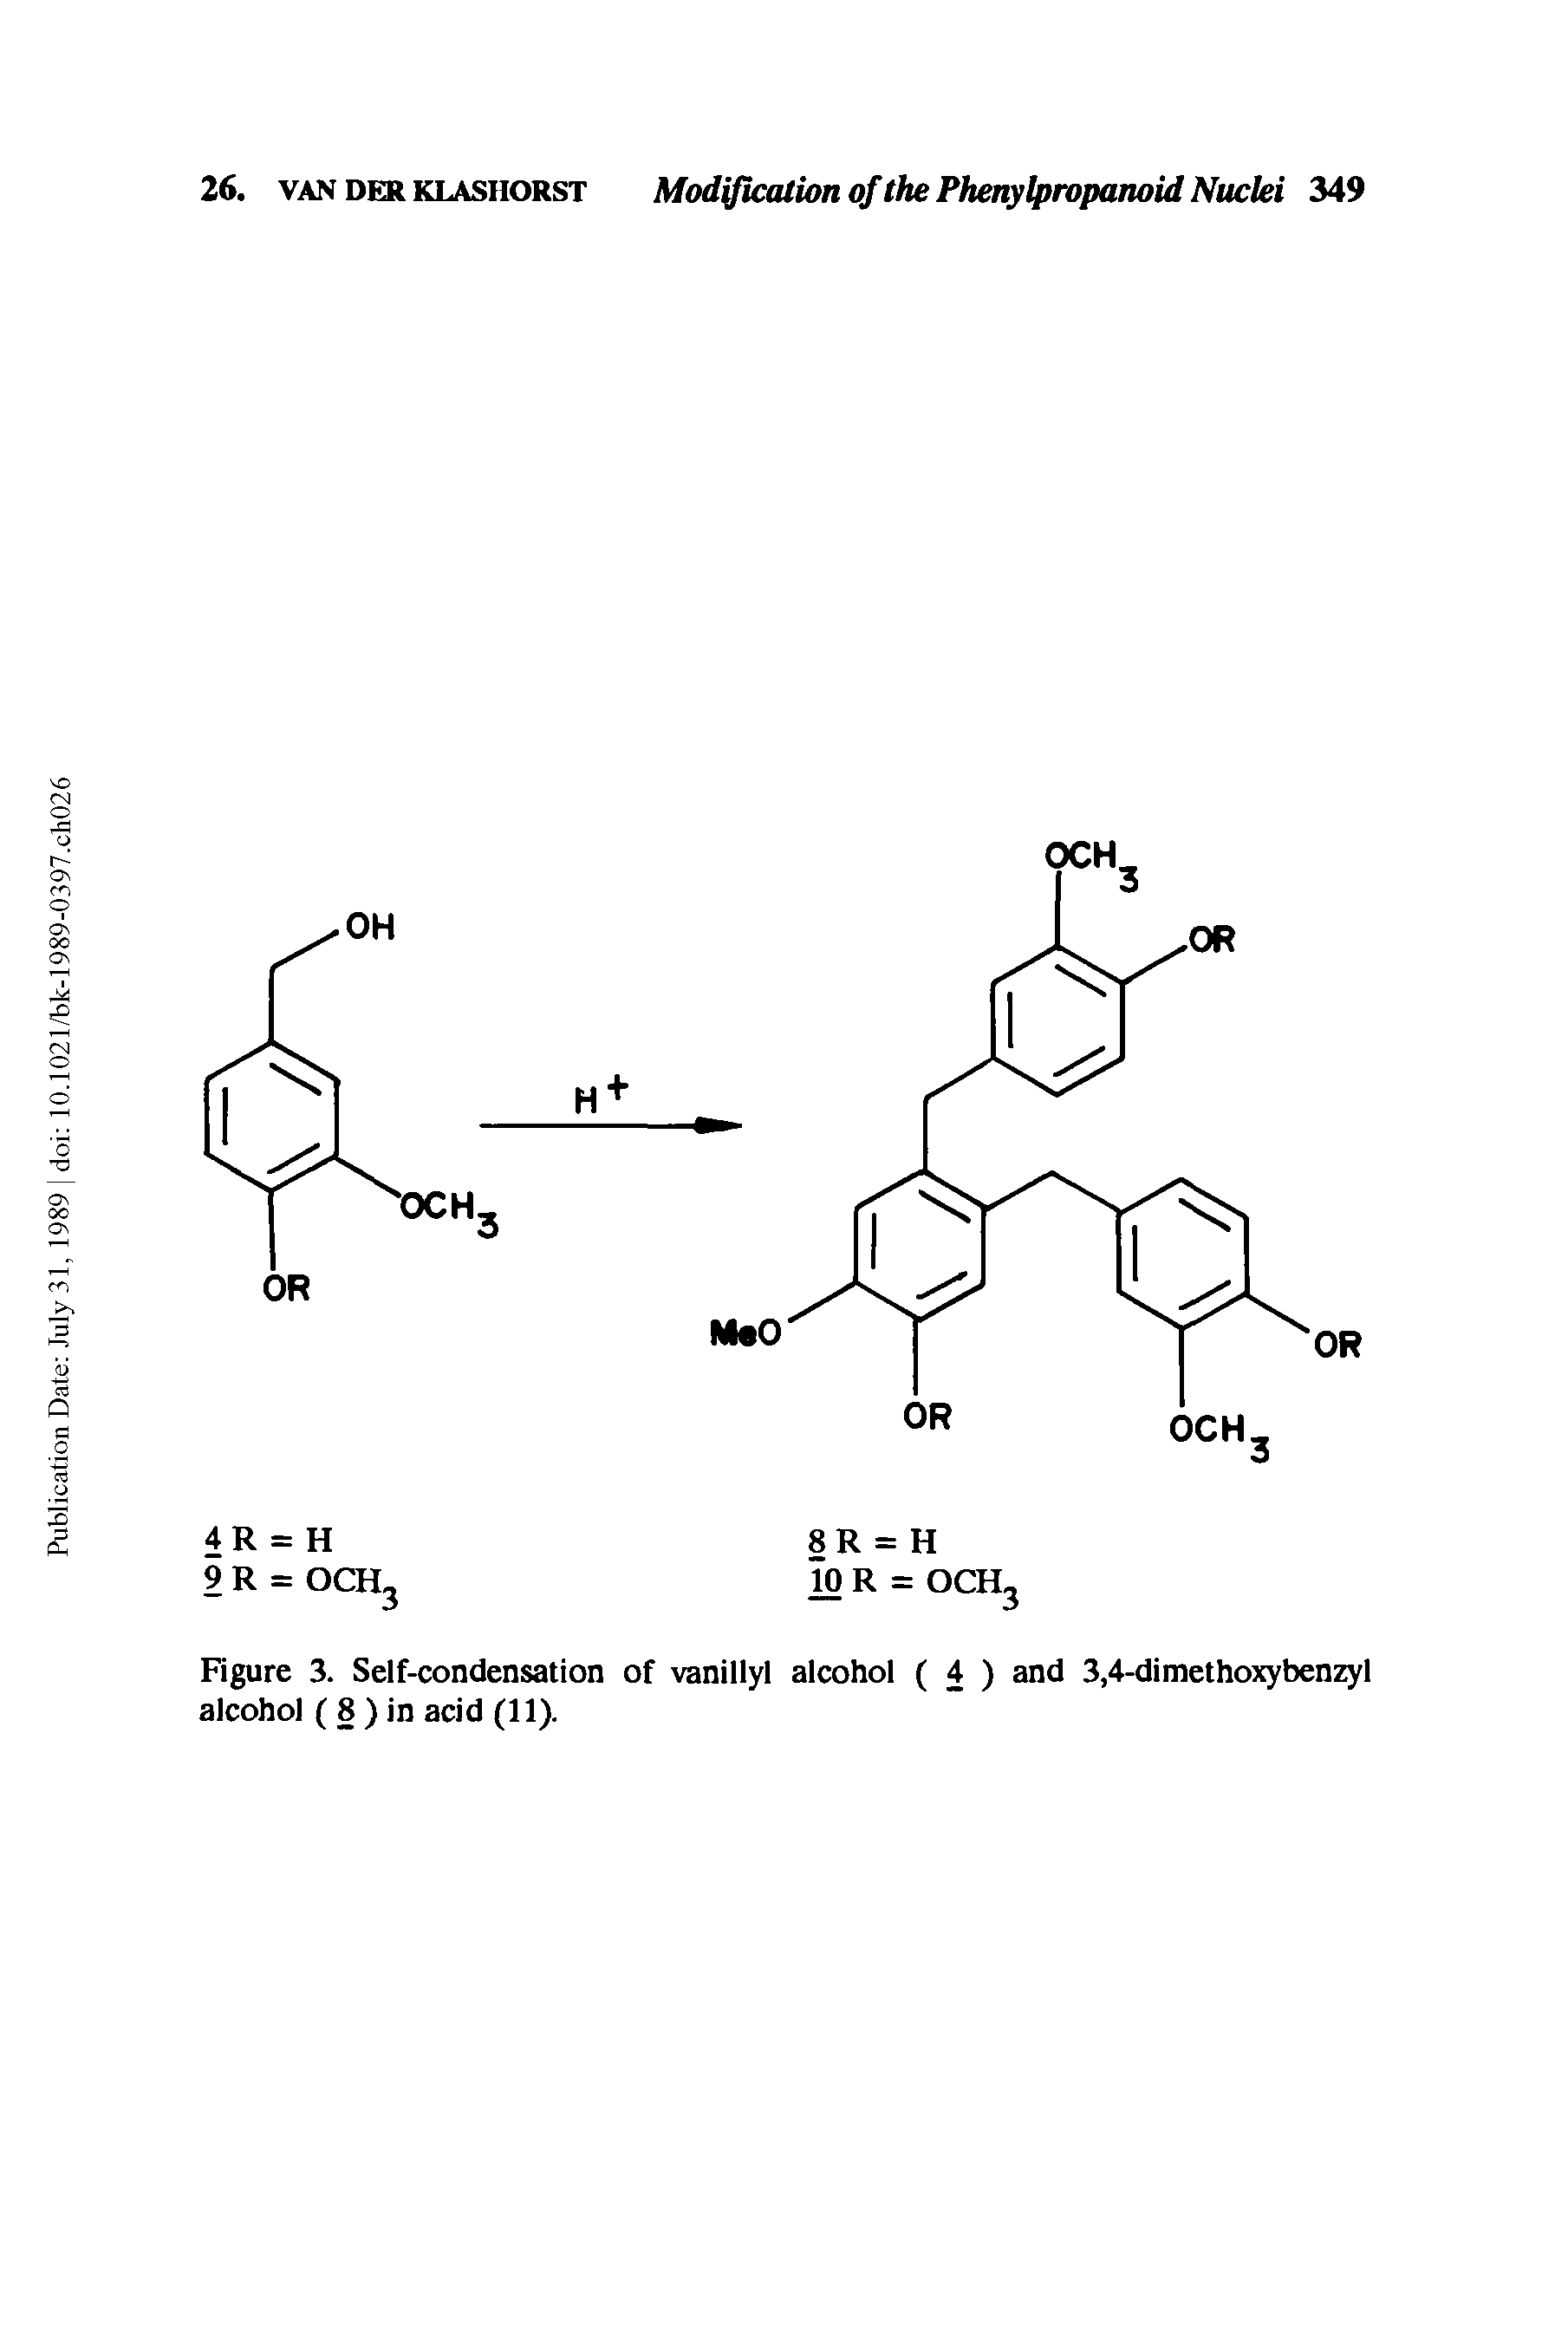 Figure 3. Self-condensation of vanillyl alcohol ( 4 ) and 3,4-dimethoxybenzyl alcohol ( 8 ) in acid (11).